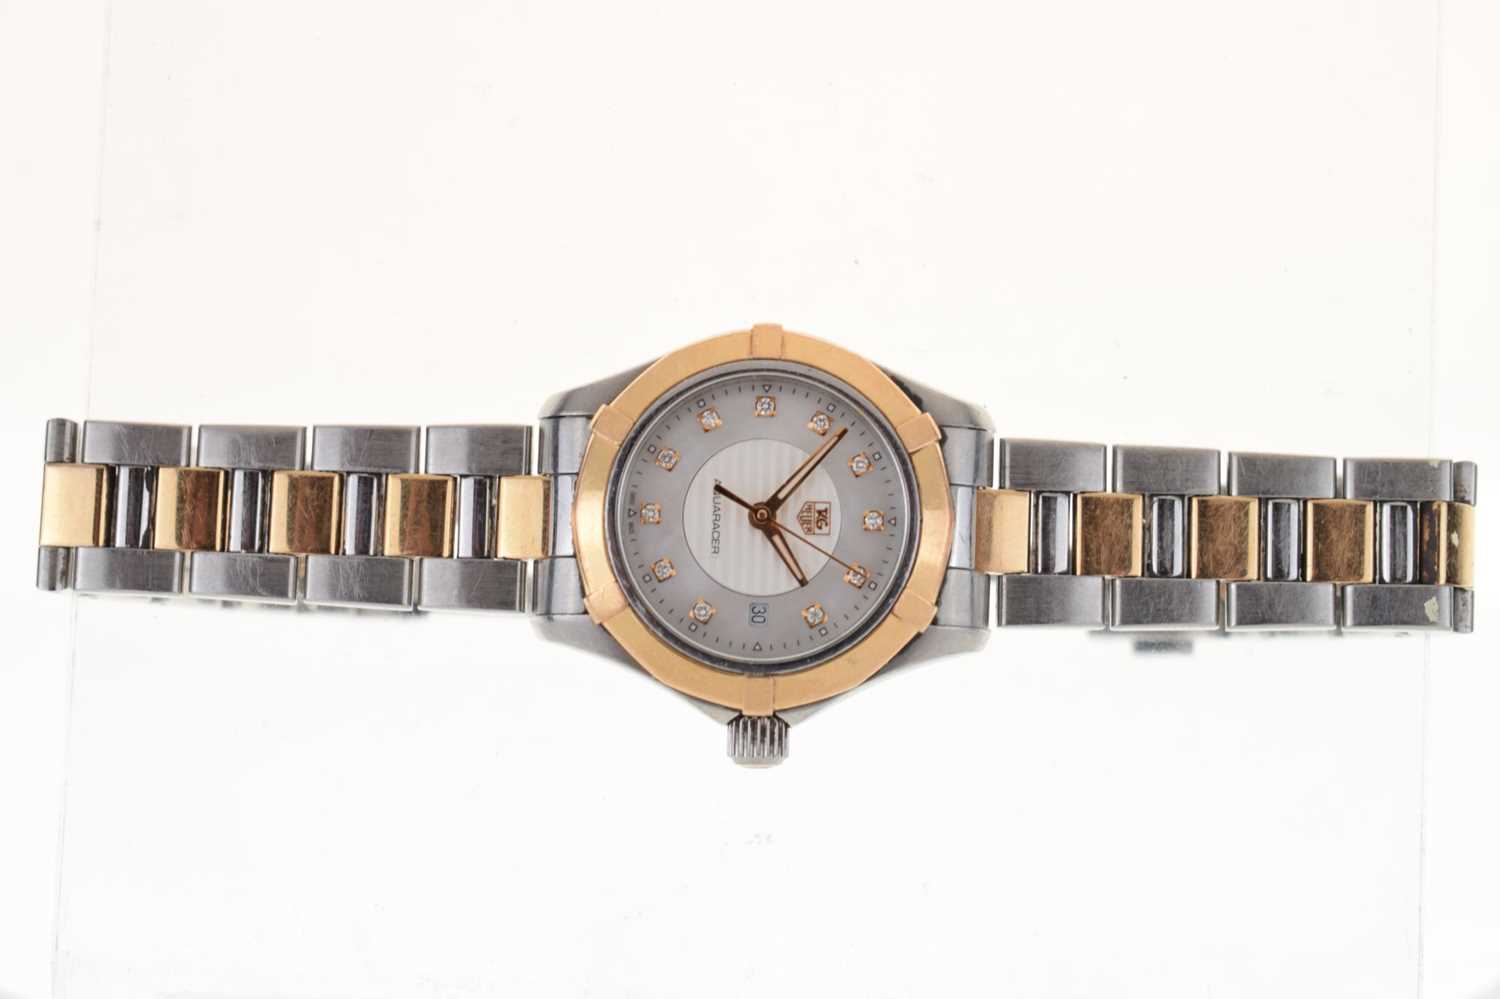 Tag Heuer - Lady's Aquaracer two-tone stainless steel bracelet watch - Image 8 of 9